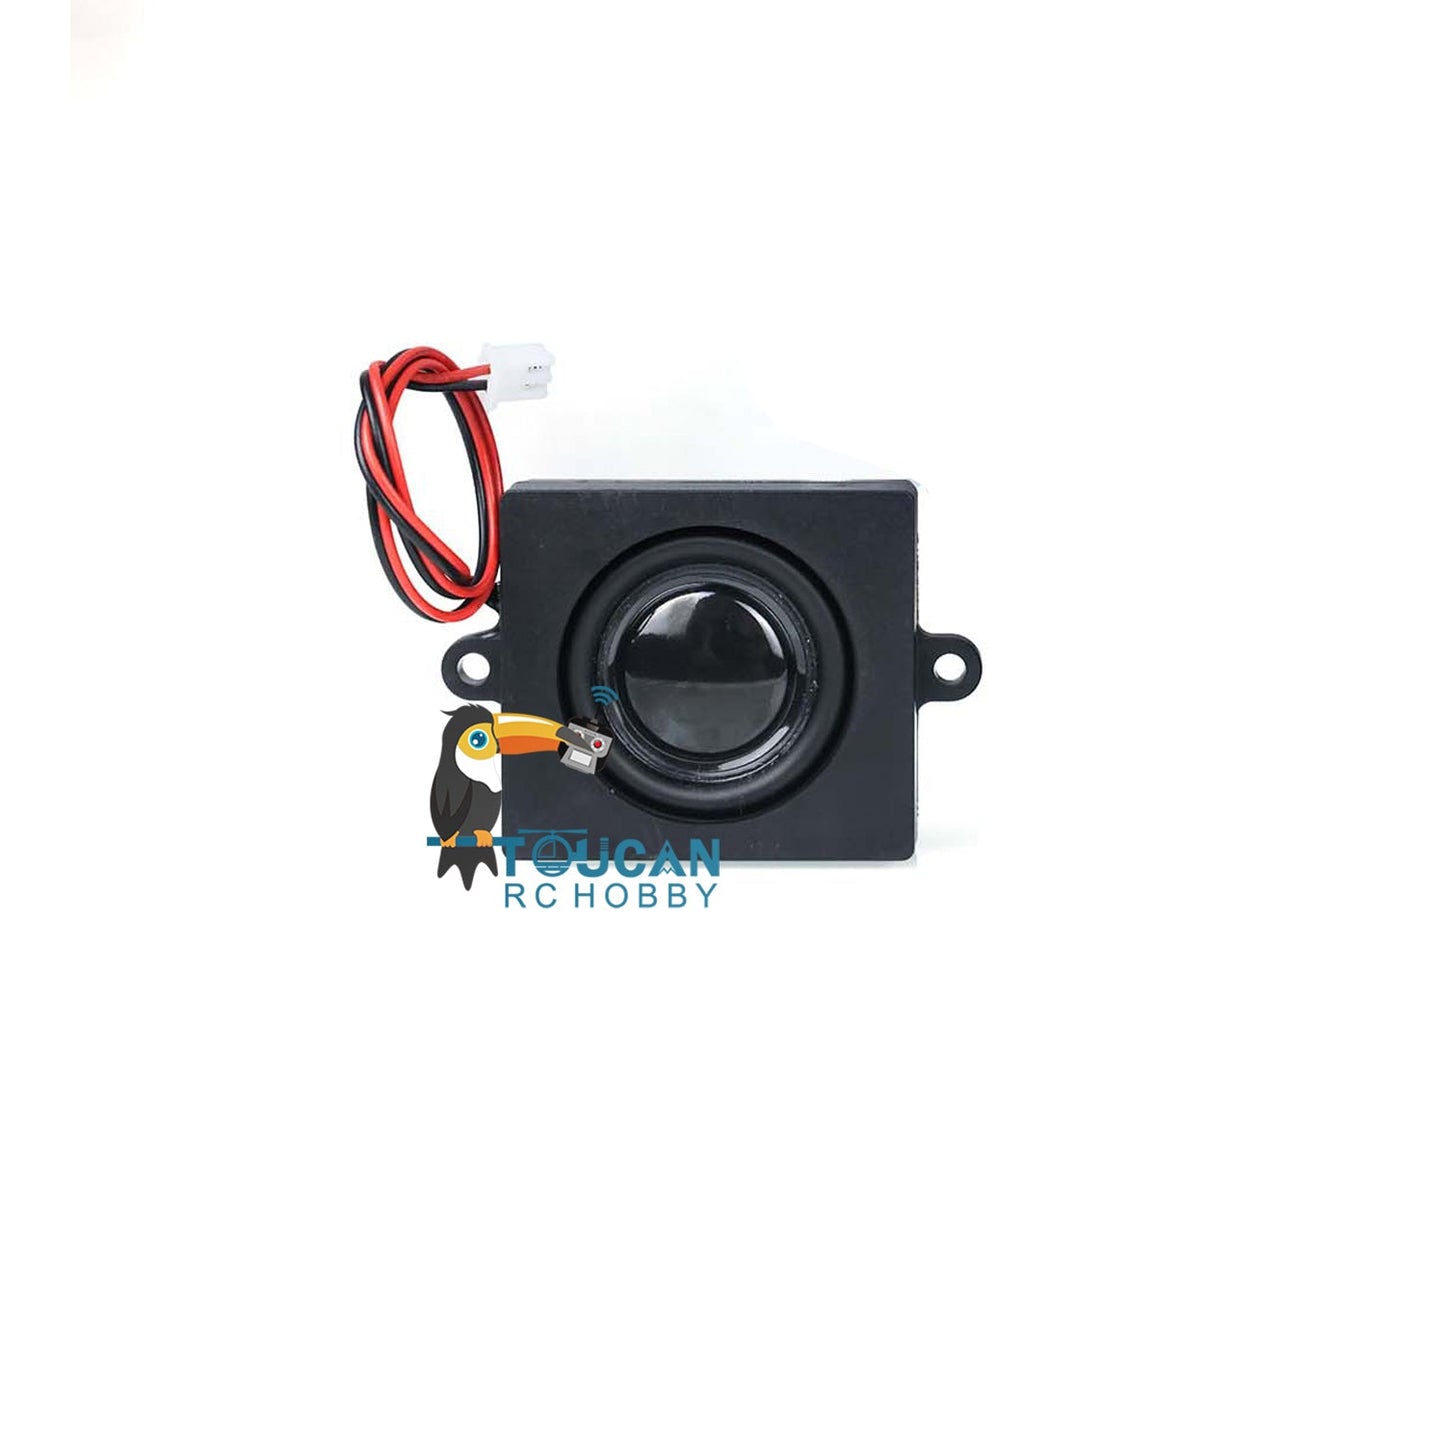 US Warehouse Henglong Plastic Speaker for DIY 1/16 Scale RC Tank Model Armored Car Destroyer Universal Part Upgrade Replacements